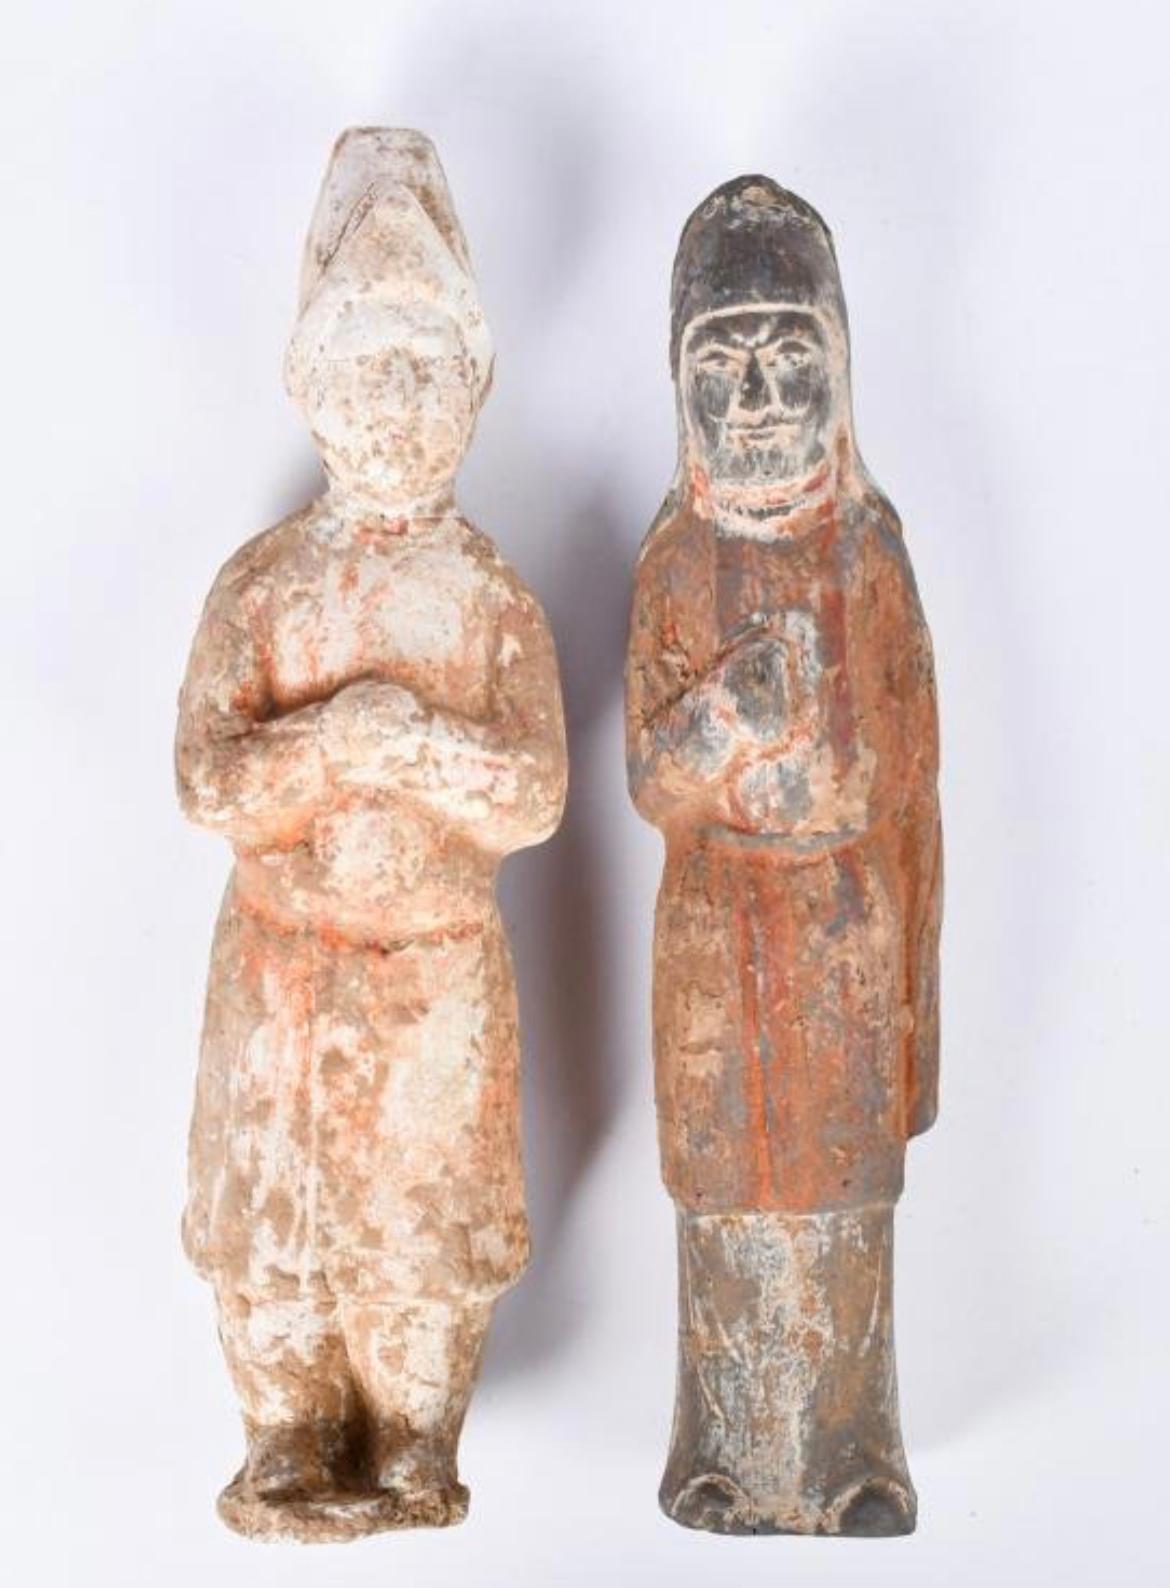 Pair of Tang Dynasty Figures - Brown Figurative Sculpture by Unknown